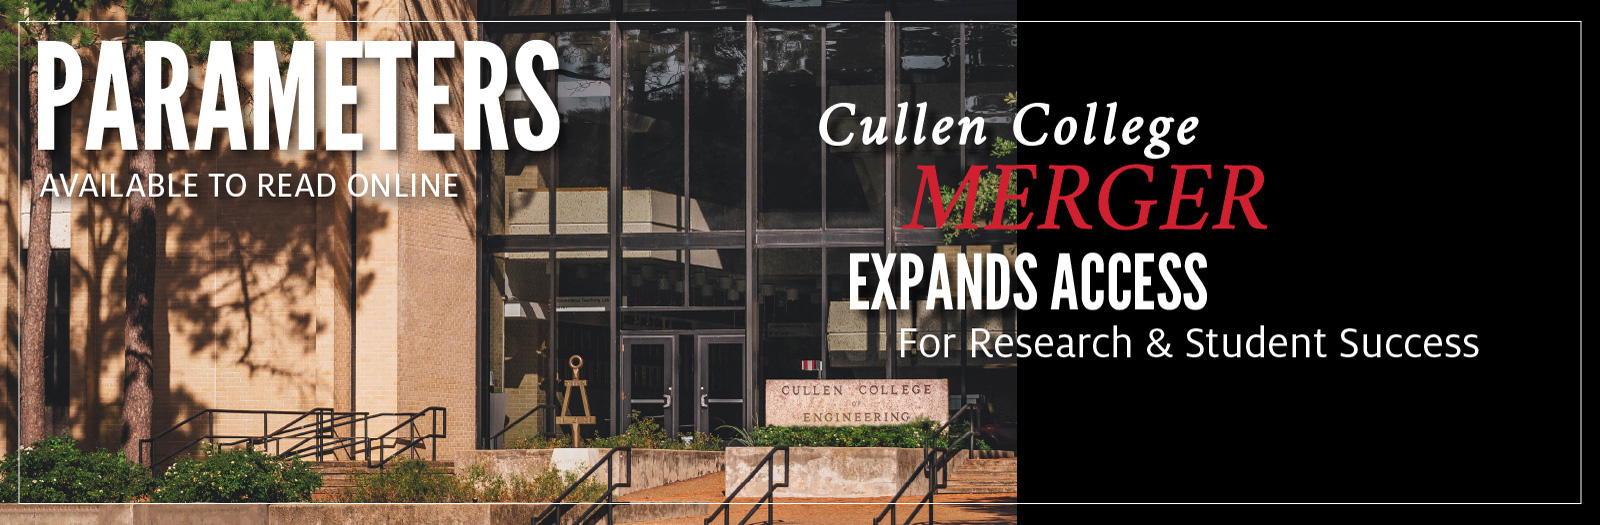 Cullen College Merger Expands Access For Research & Student Success